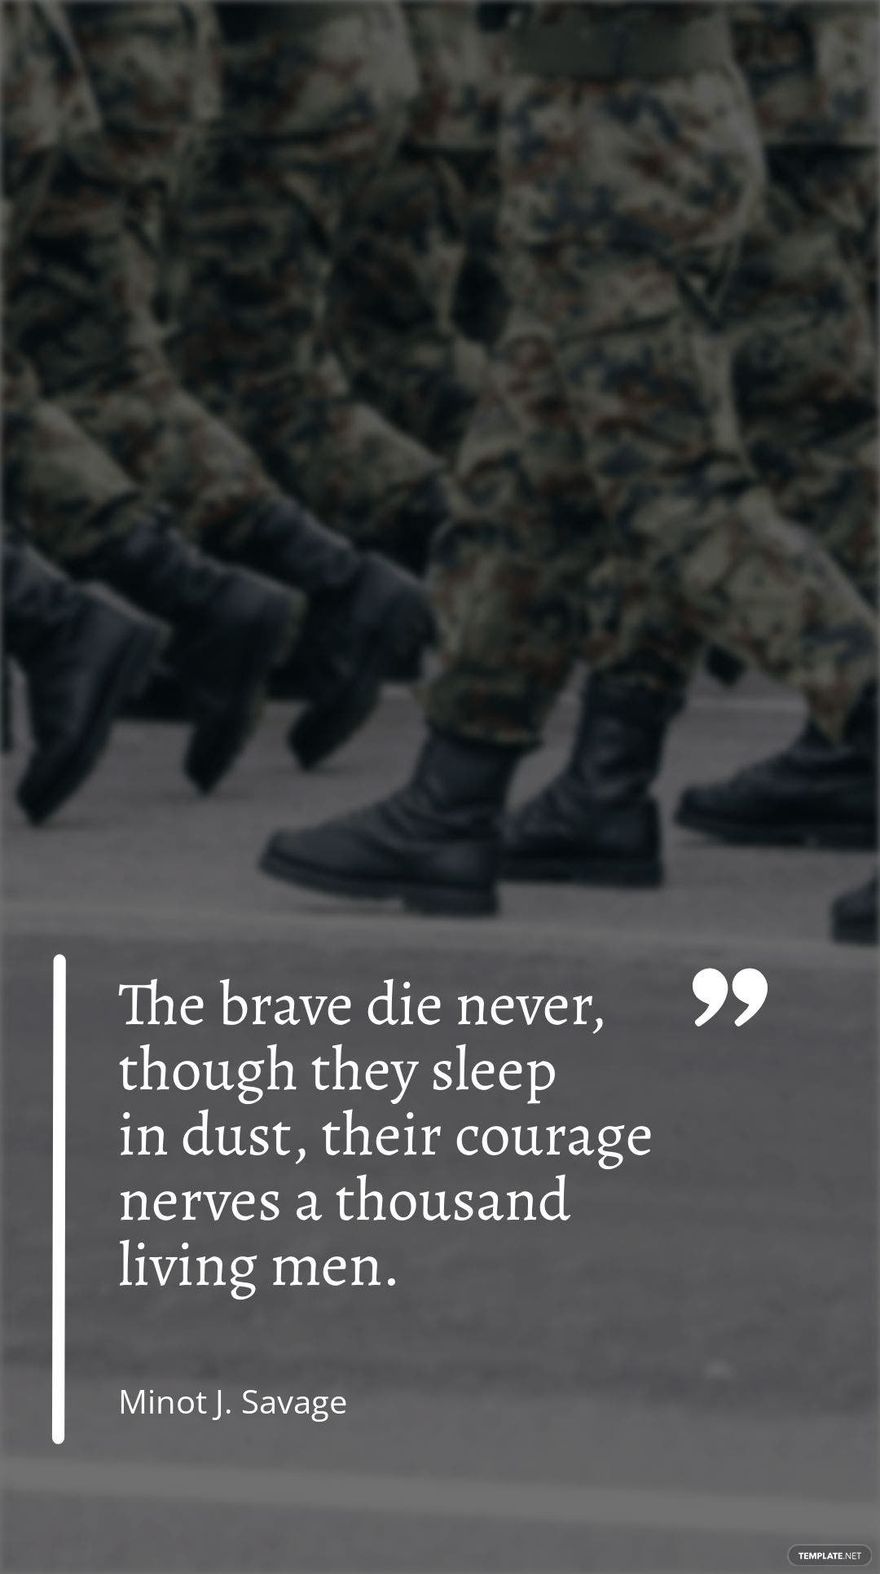 Minot J. Savage - ”The brave die never, though they sleep in dust, their courage nerves a thousand living men.”